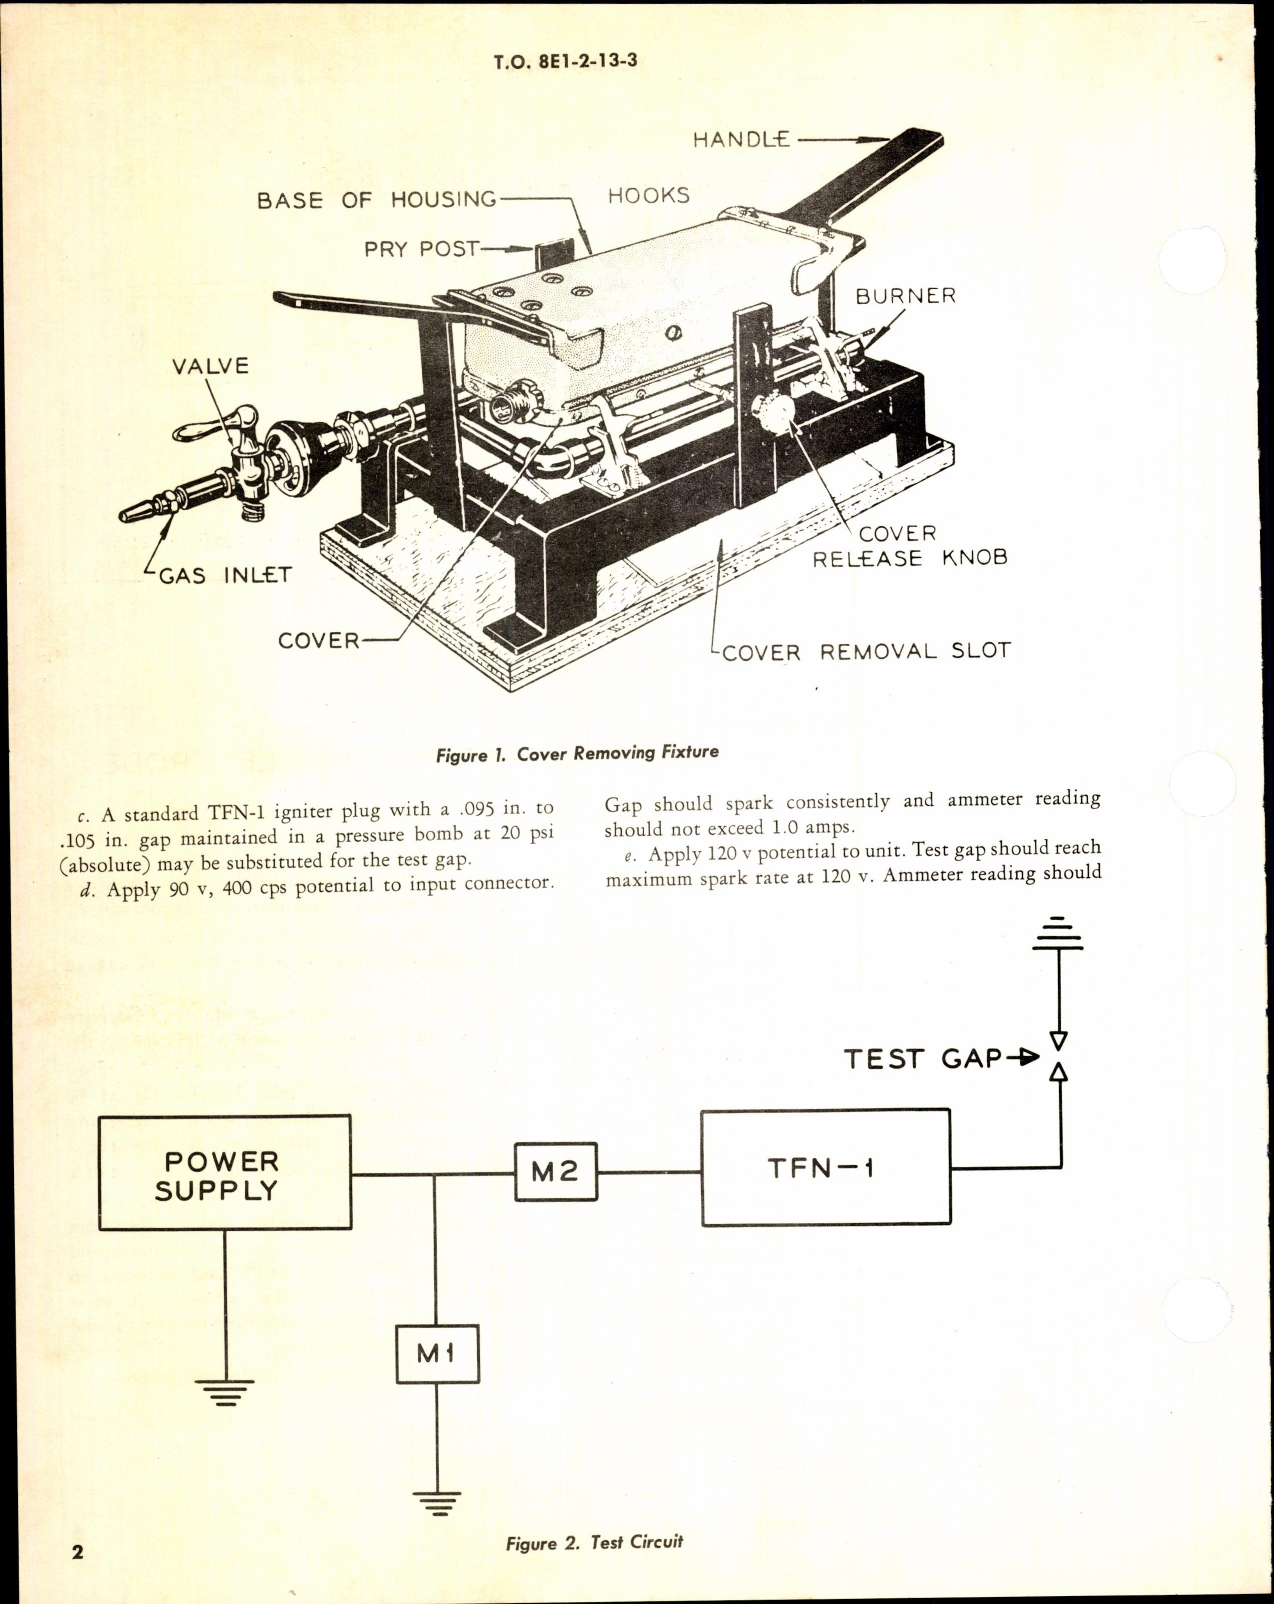 Sample page 2 from AirCorps Library document: Instructions w Parts Breakdown for TFN-1 Ignition System